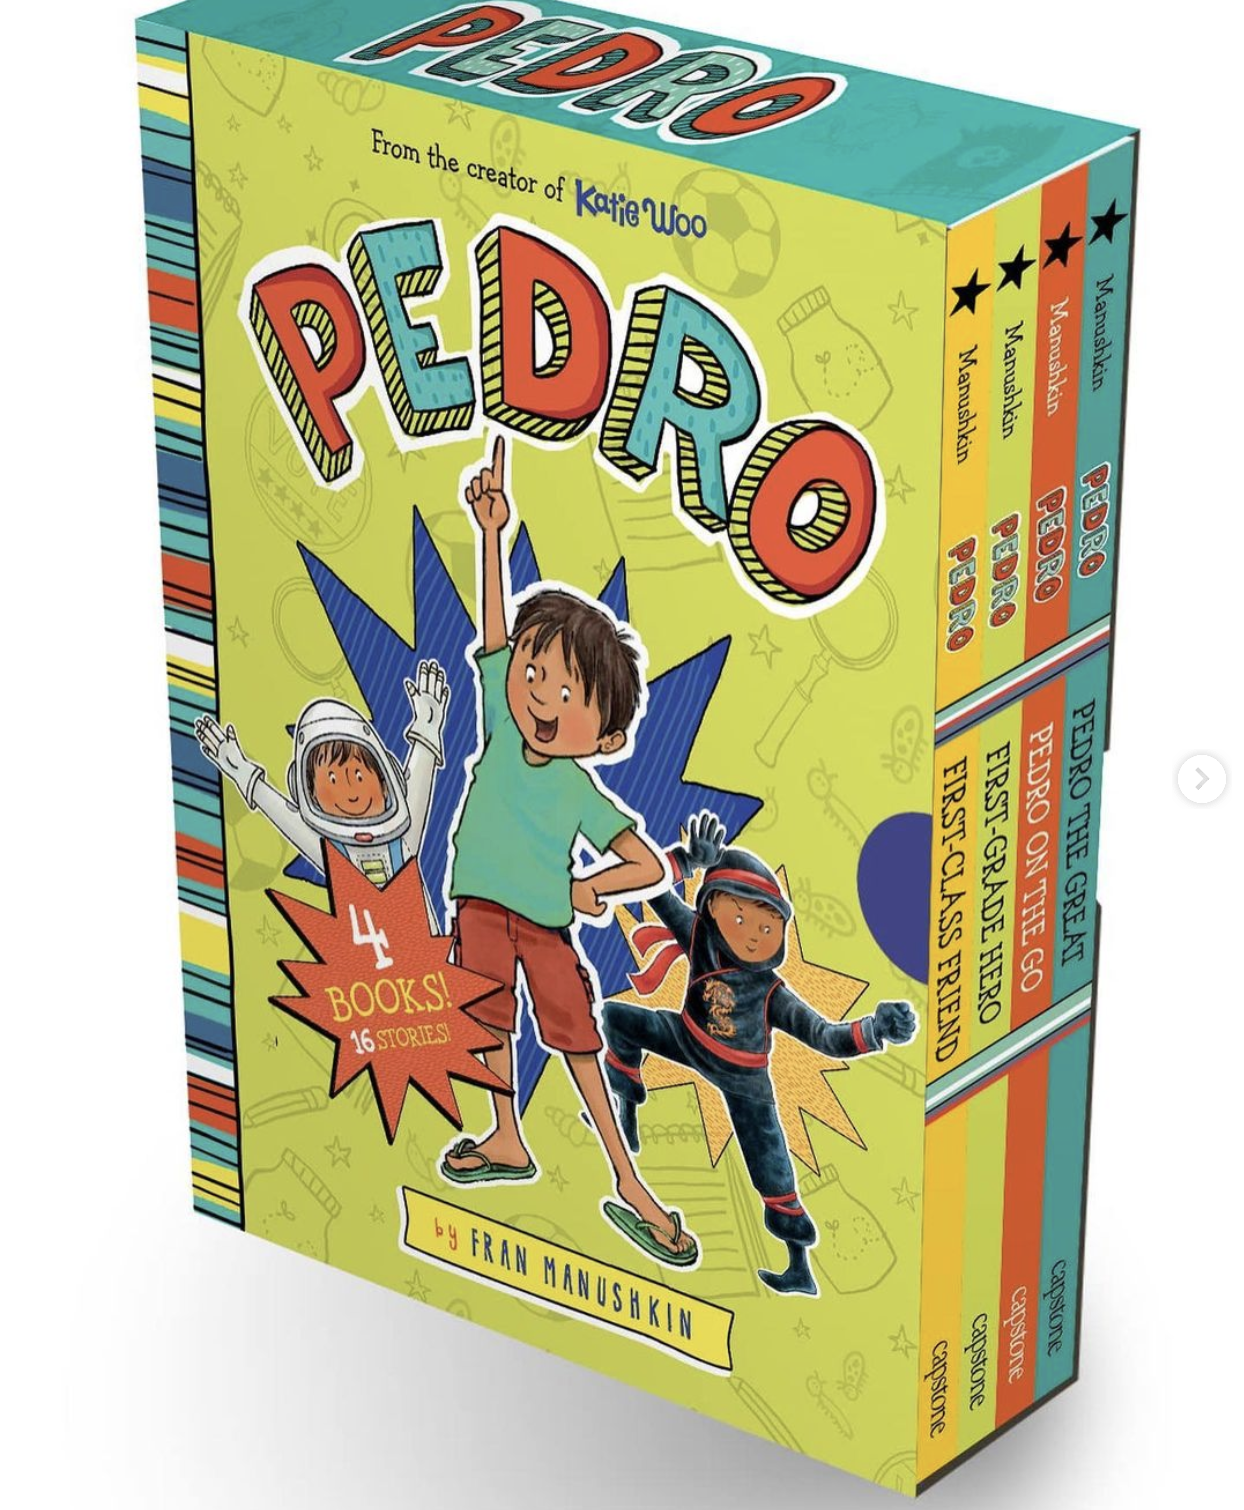 Excited to share the Pedro boxed set available for pre-order on Amazon!!